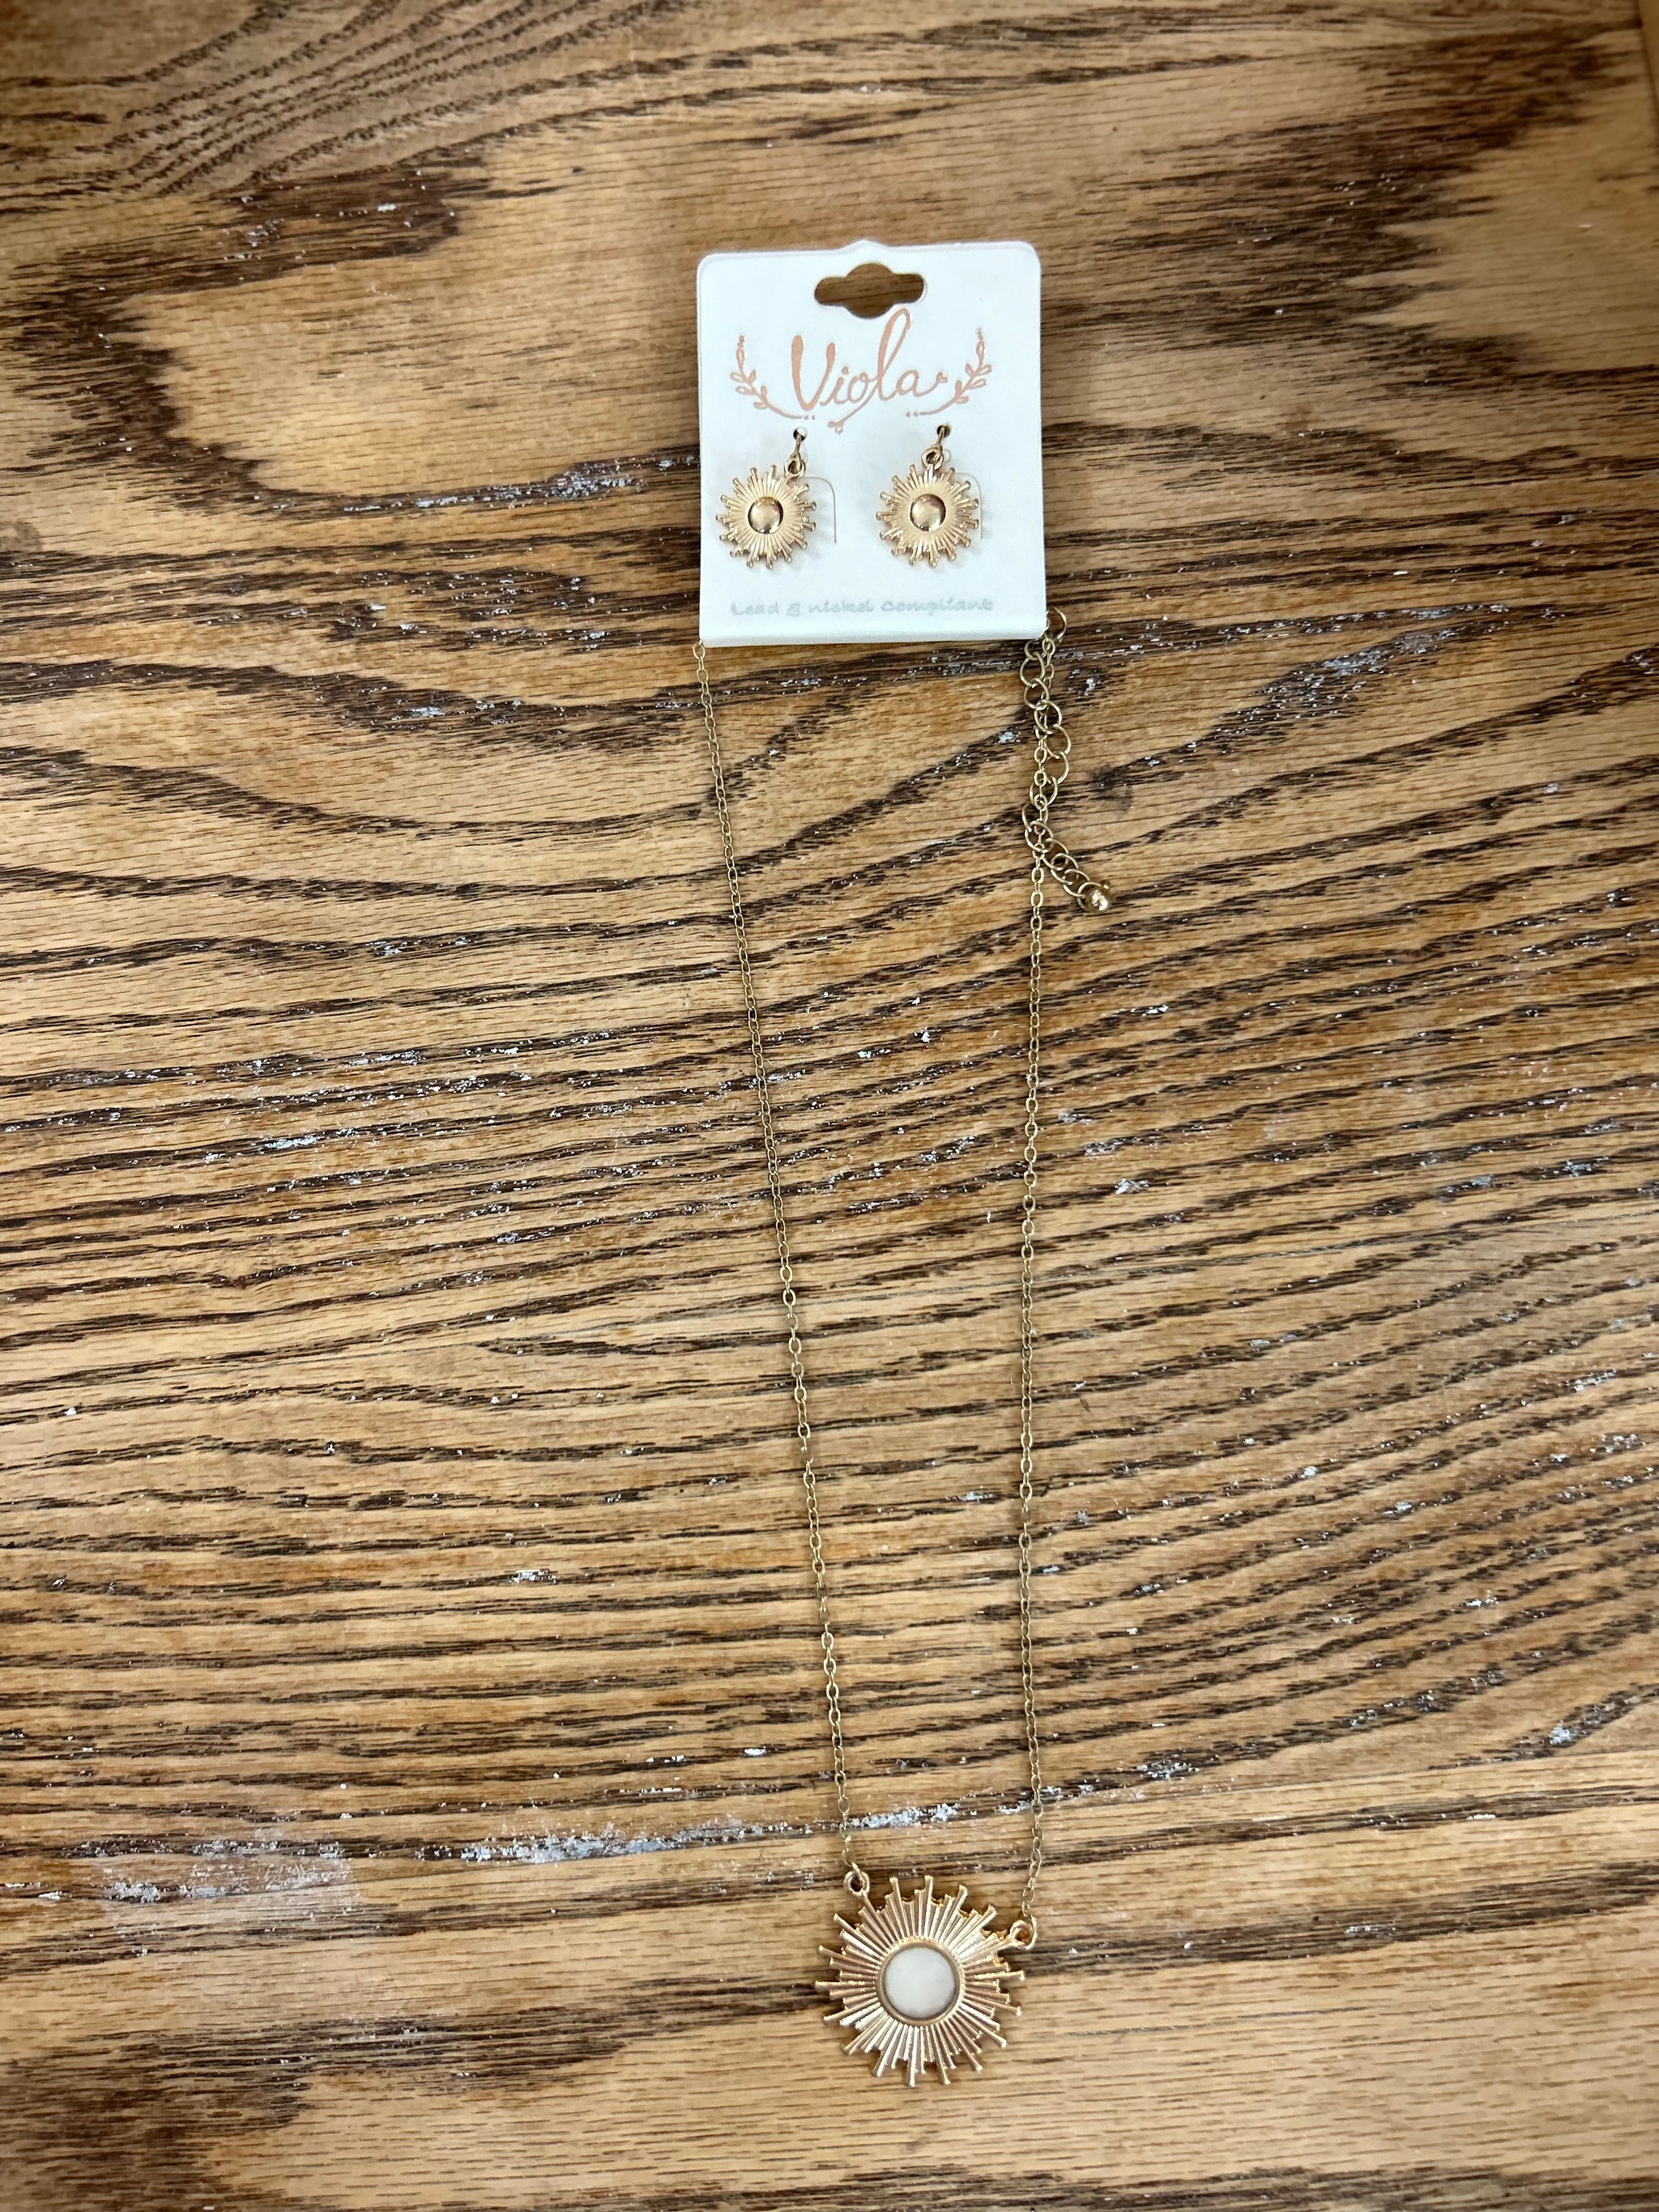 Moon Earring and Necklace Set